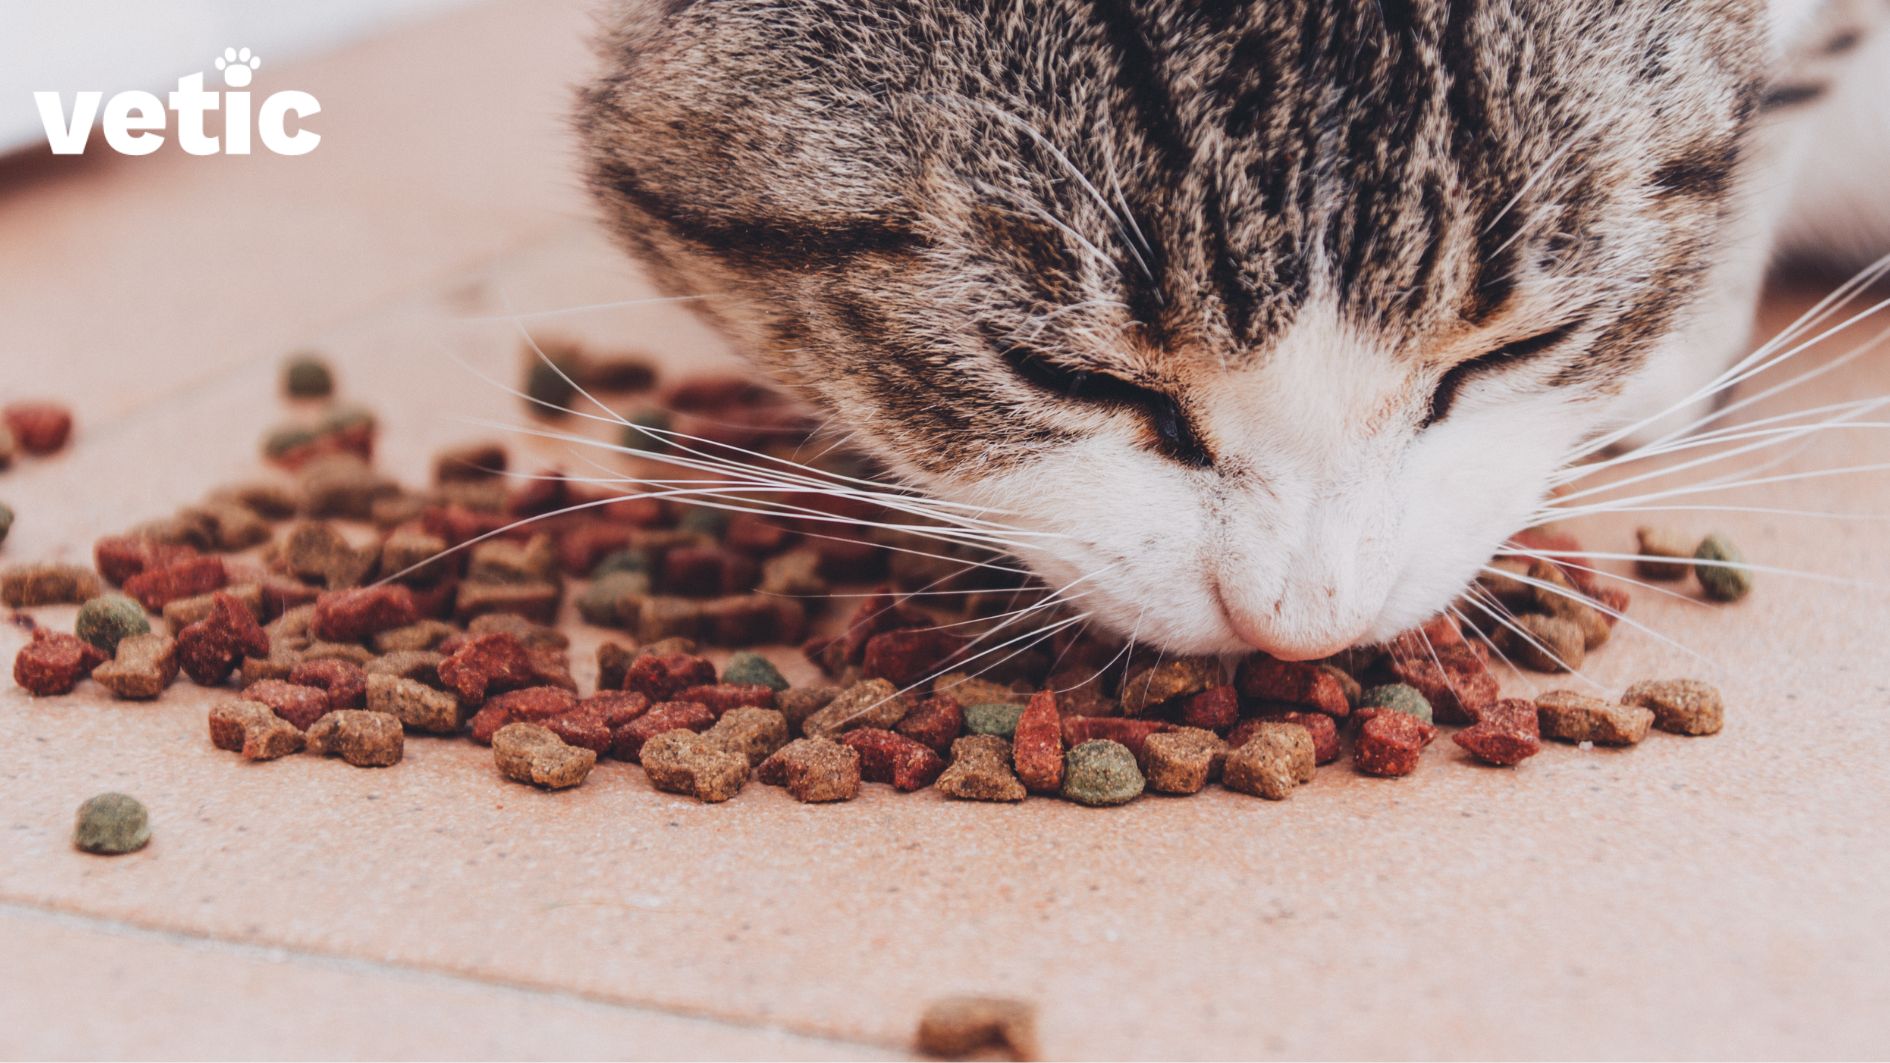 Close-up shot of a cat eating small fish shaped dry cat food from the ground. only part of the cat's head and face are visible. the cat has a white muzzle and a striped grey pattern on the head.